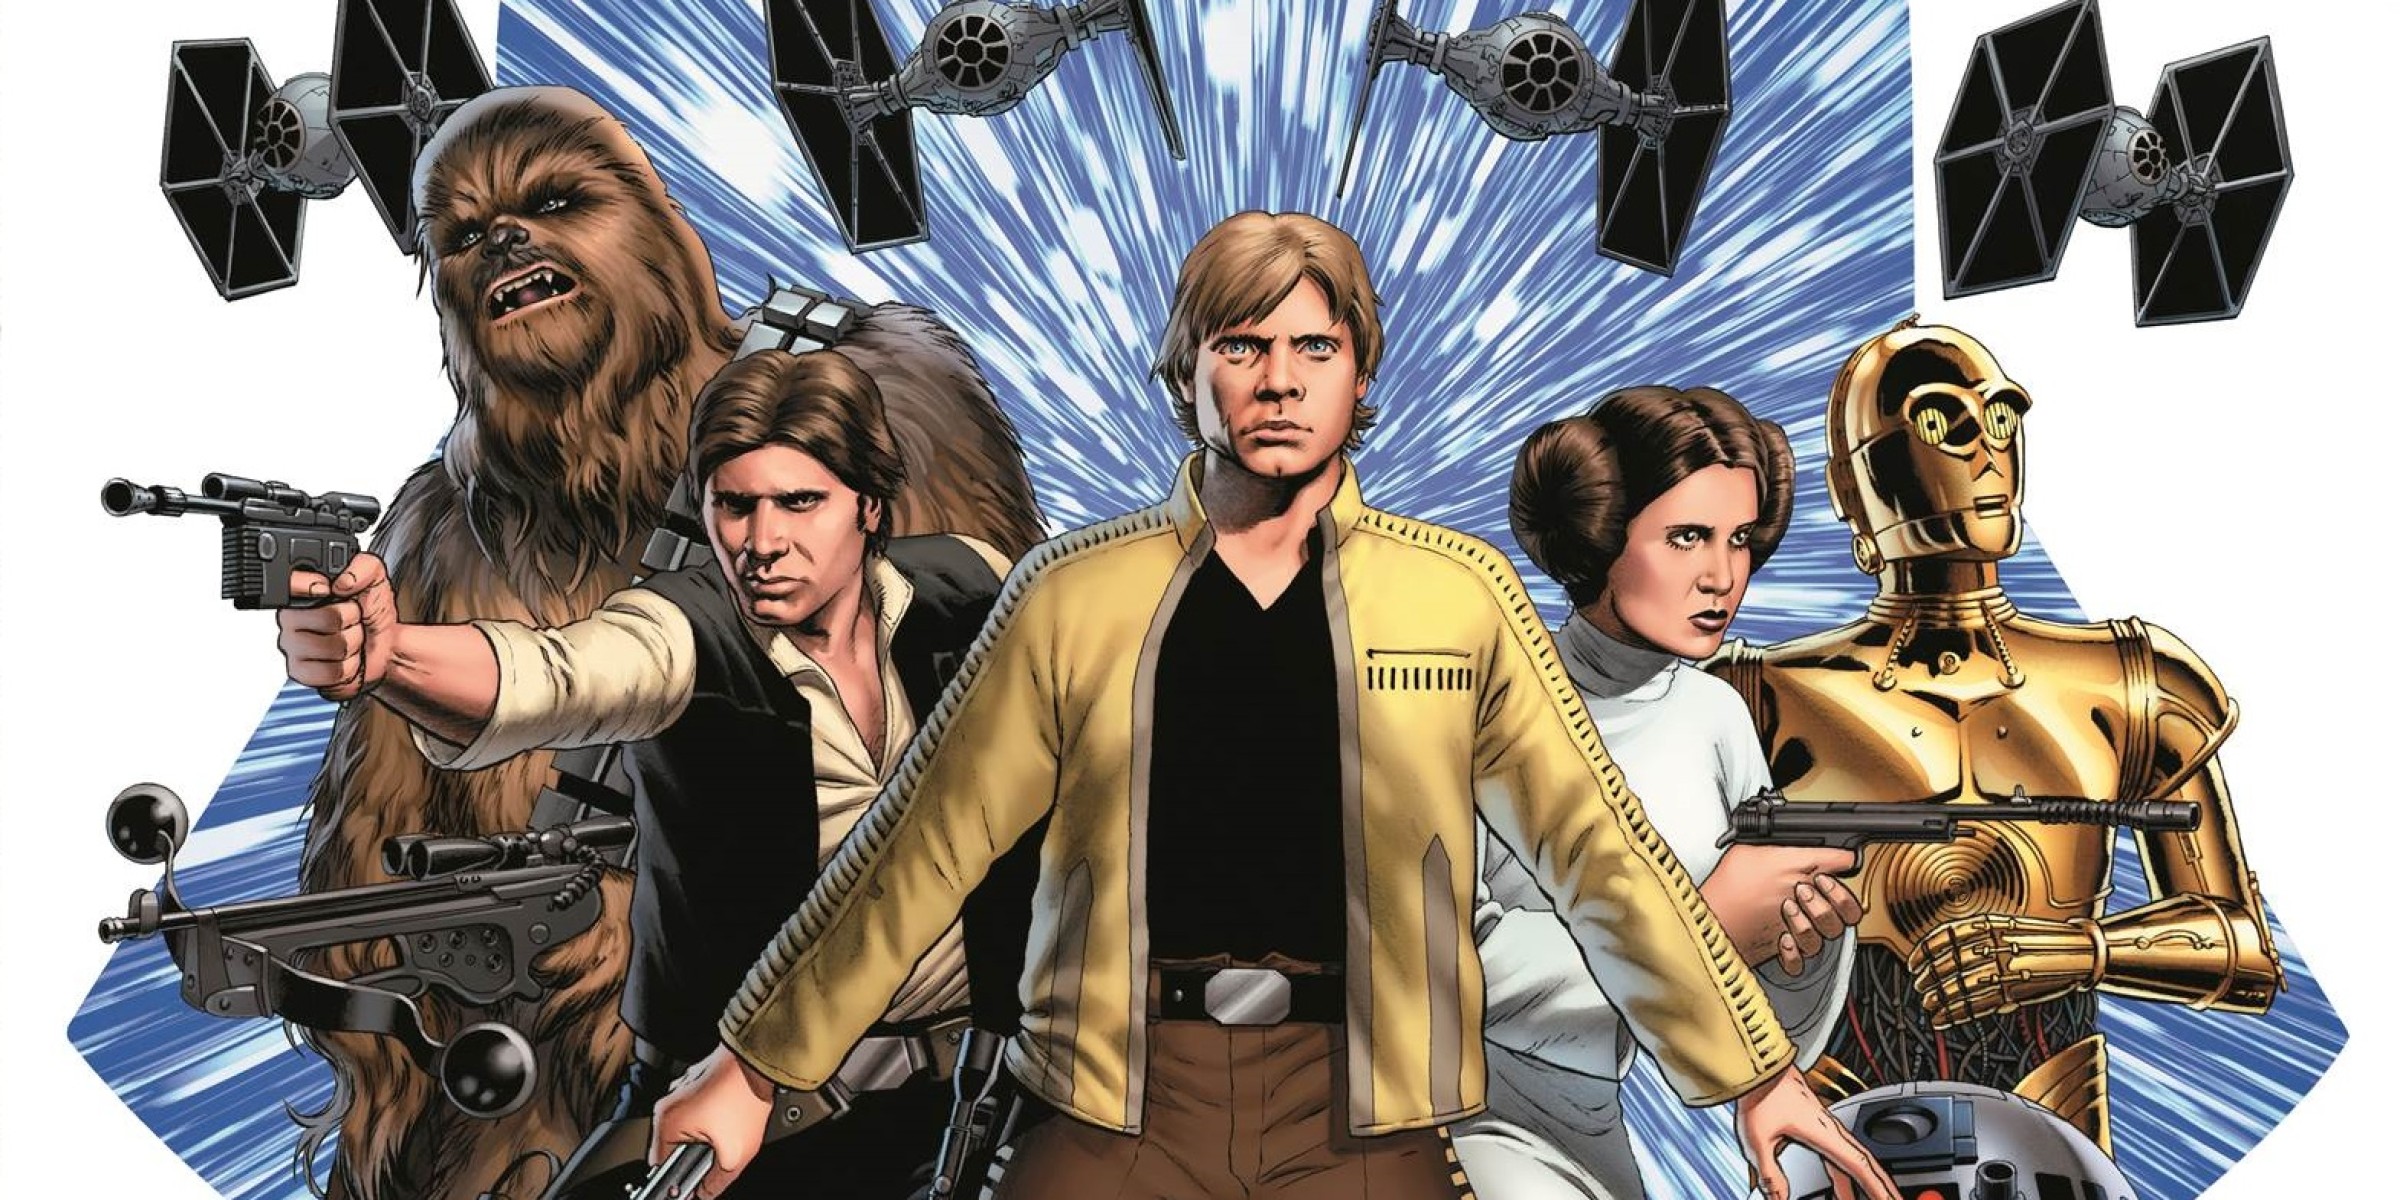 Just How Much Is Star Wars #6 Shaking Up Han Solo's Backstory?